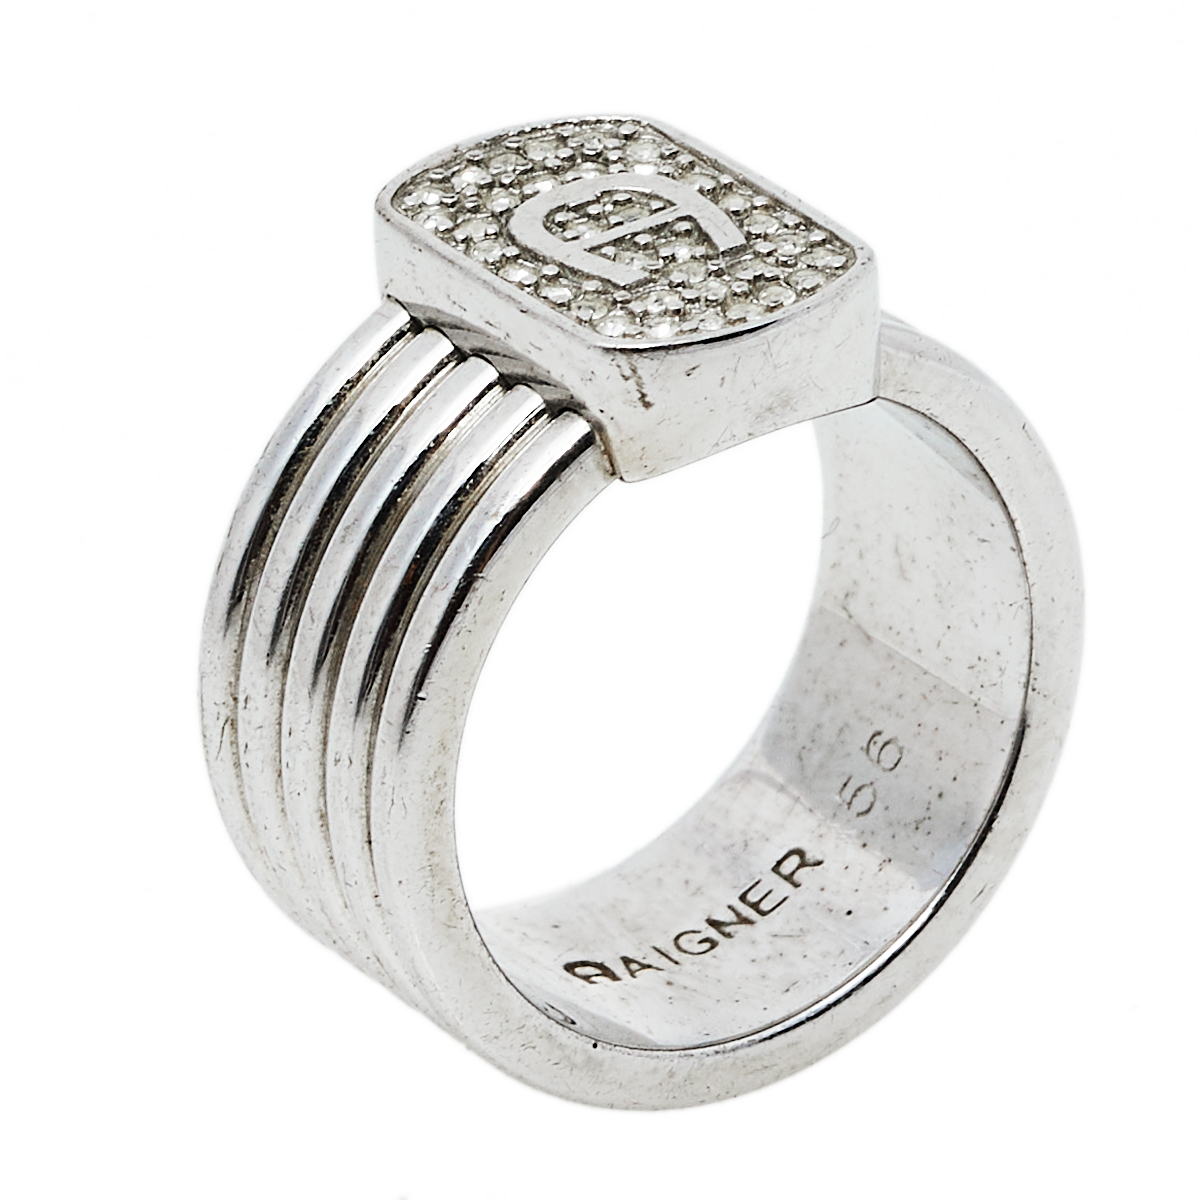 Add a statement finish to your look of the day with this Aigner ring. Featuring a silver tone band this ring is topped with a crystal embedded logo top. Wear it stacked with other rings or as a stand alone piece.